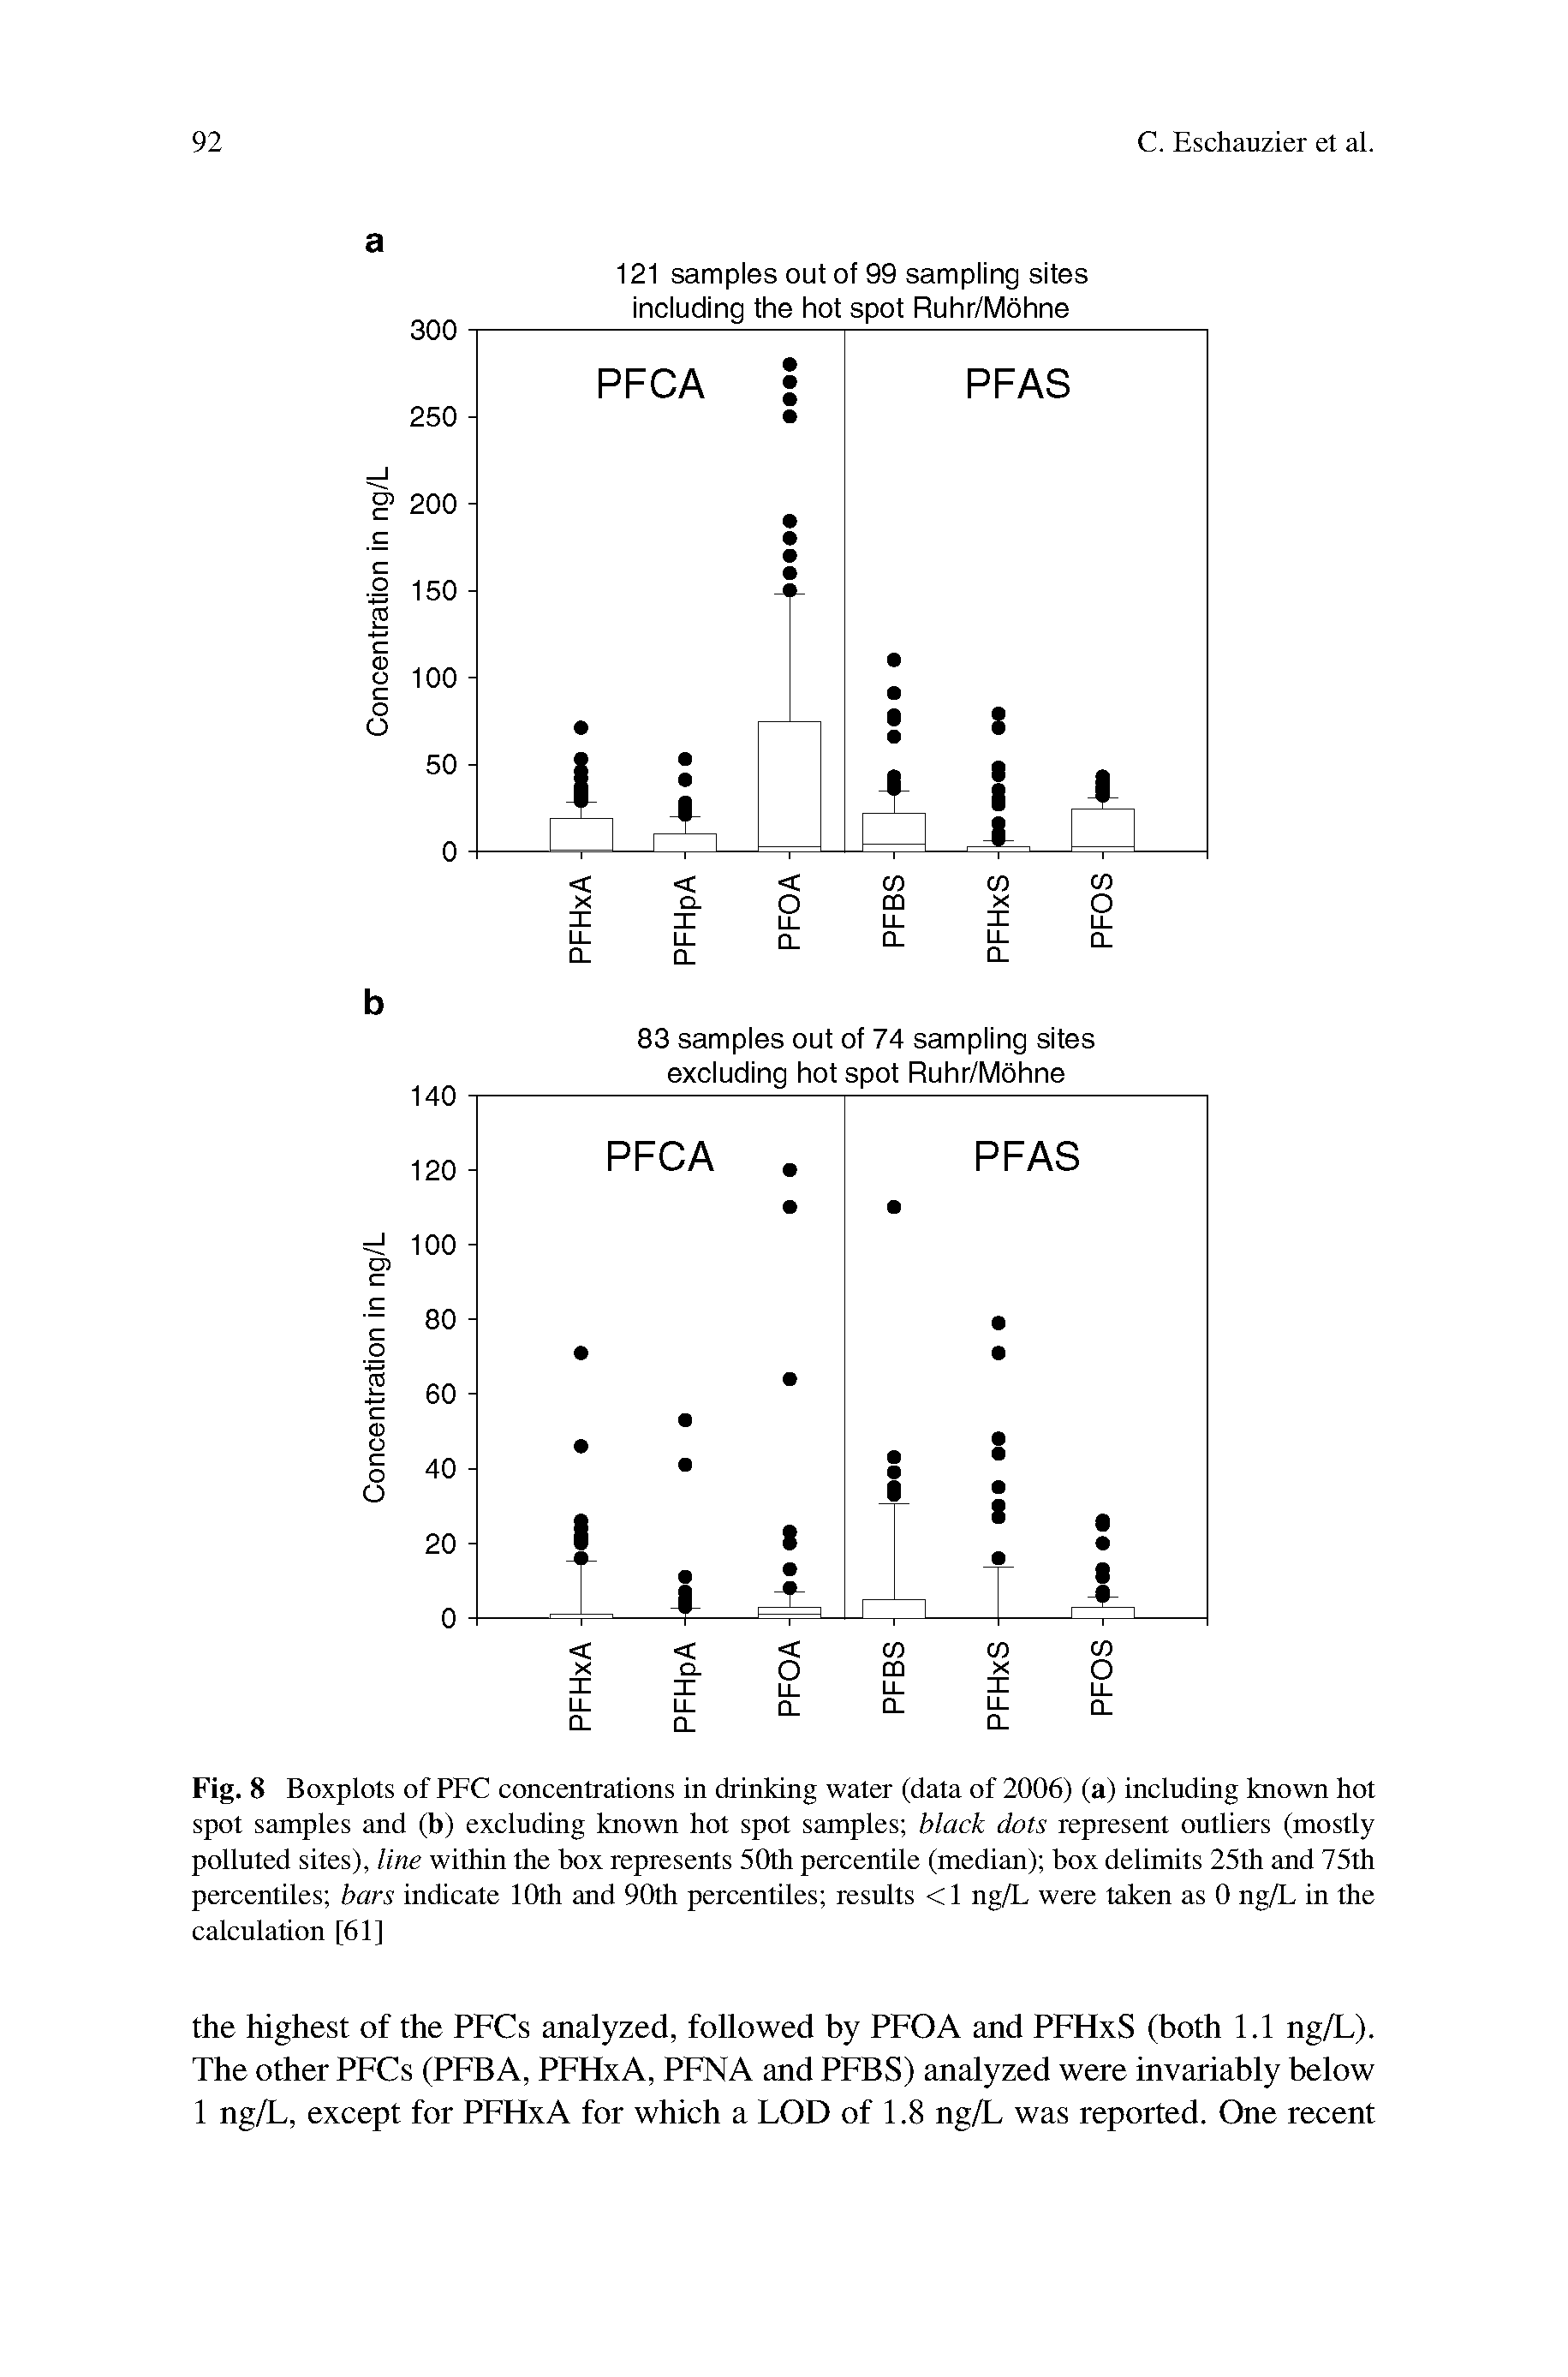 Fig. 8 Boxplots of PEC concentrations in drinking water (data of 2006) (a) including known hot spot samples and (b) excluding known hot spot samples black dots represent outliers (mostly polluted sites), line within the box represents 50th percentile (median) box delimits 25th and 75th percentiles bars indicate 10th and 90th percentiles results <1 ng/L were taken as 0 ng/L in the calculation [61]...